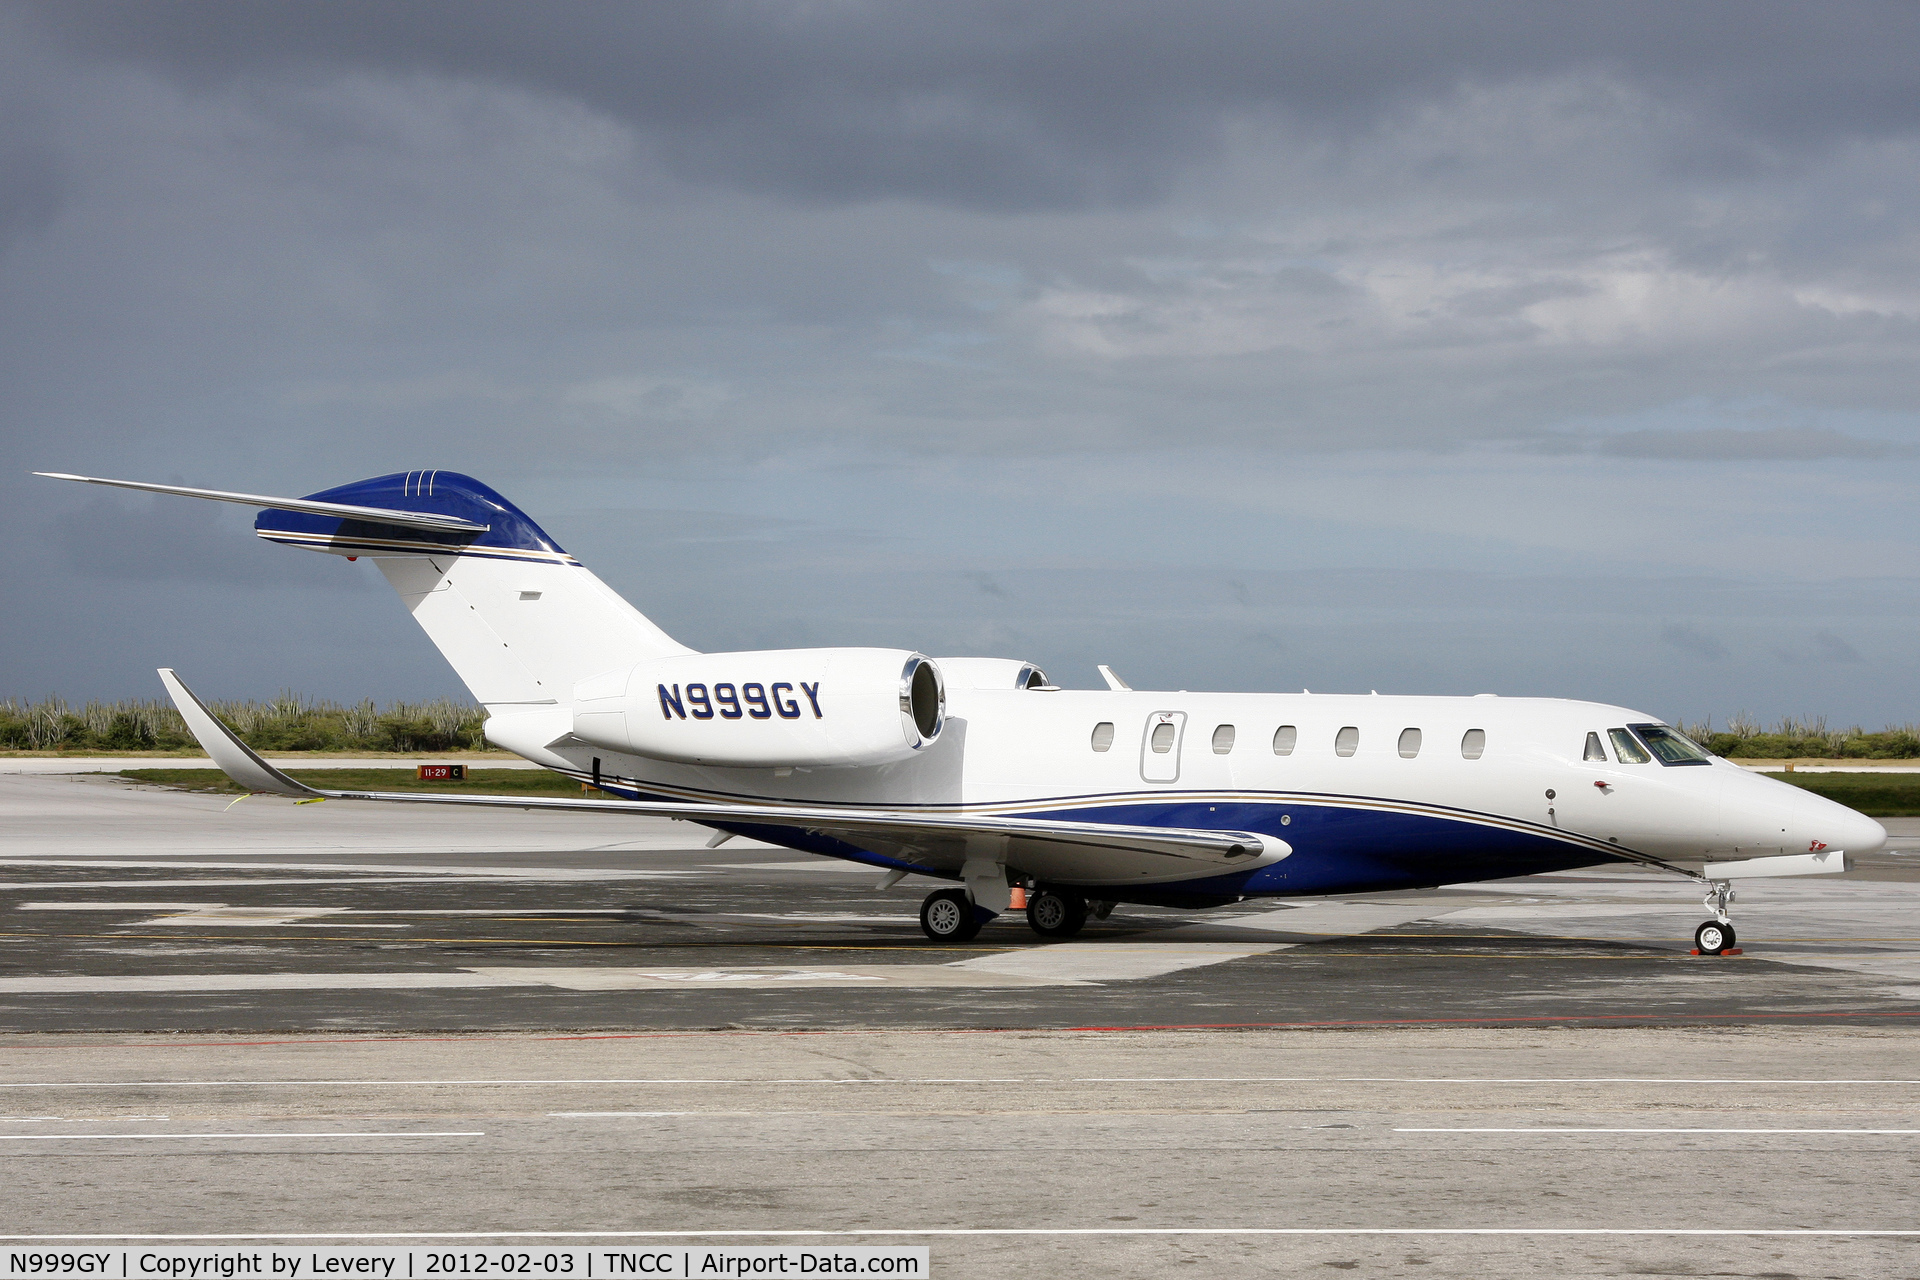 N999GY, 1998 Cessna 750 Citation X C/N 750-0063, GY parked at GEN ramp, looking nice in the Caribbean sun.